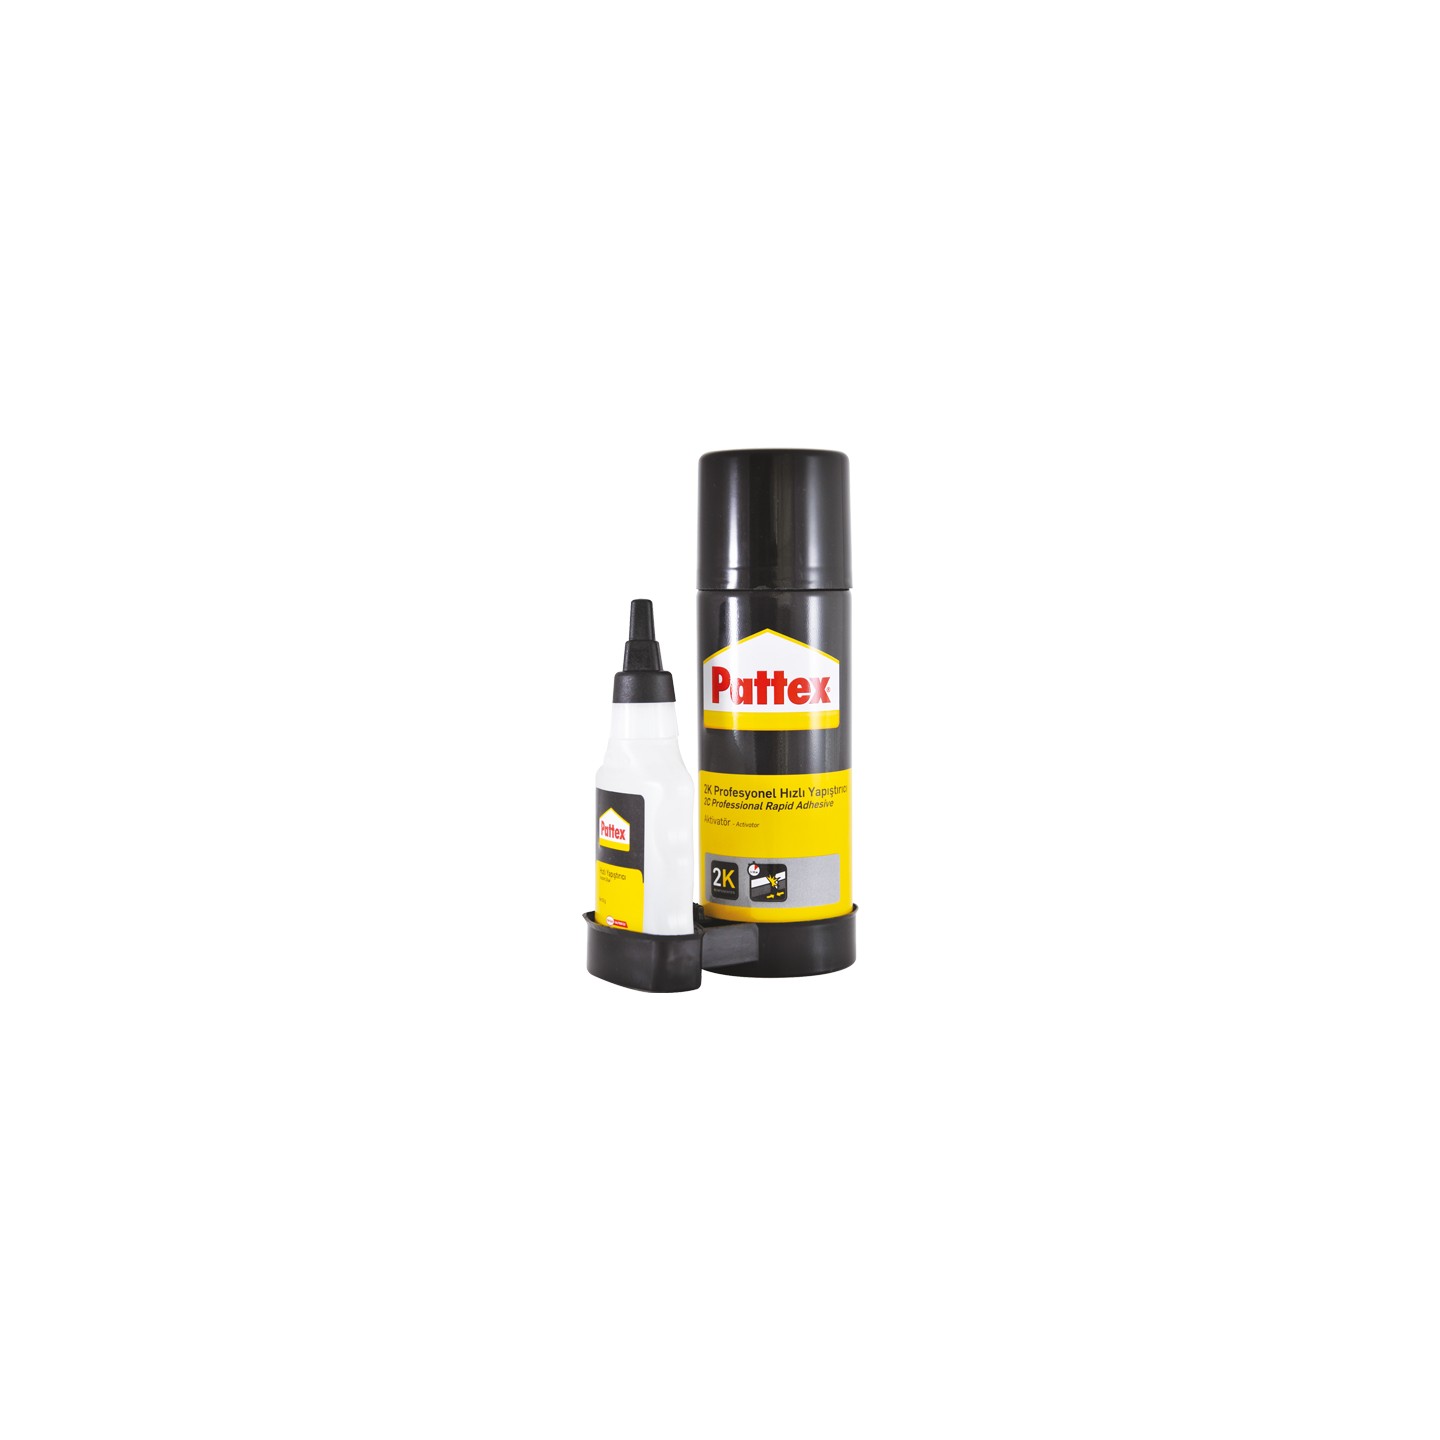 Buy Pattex Classic power glue online at Modulor